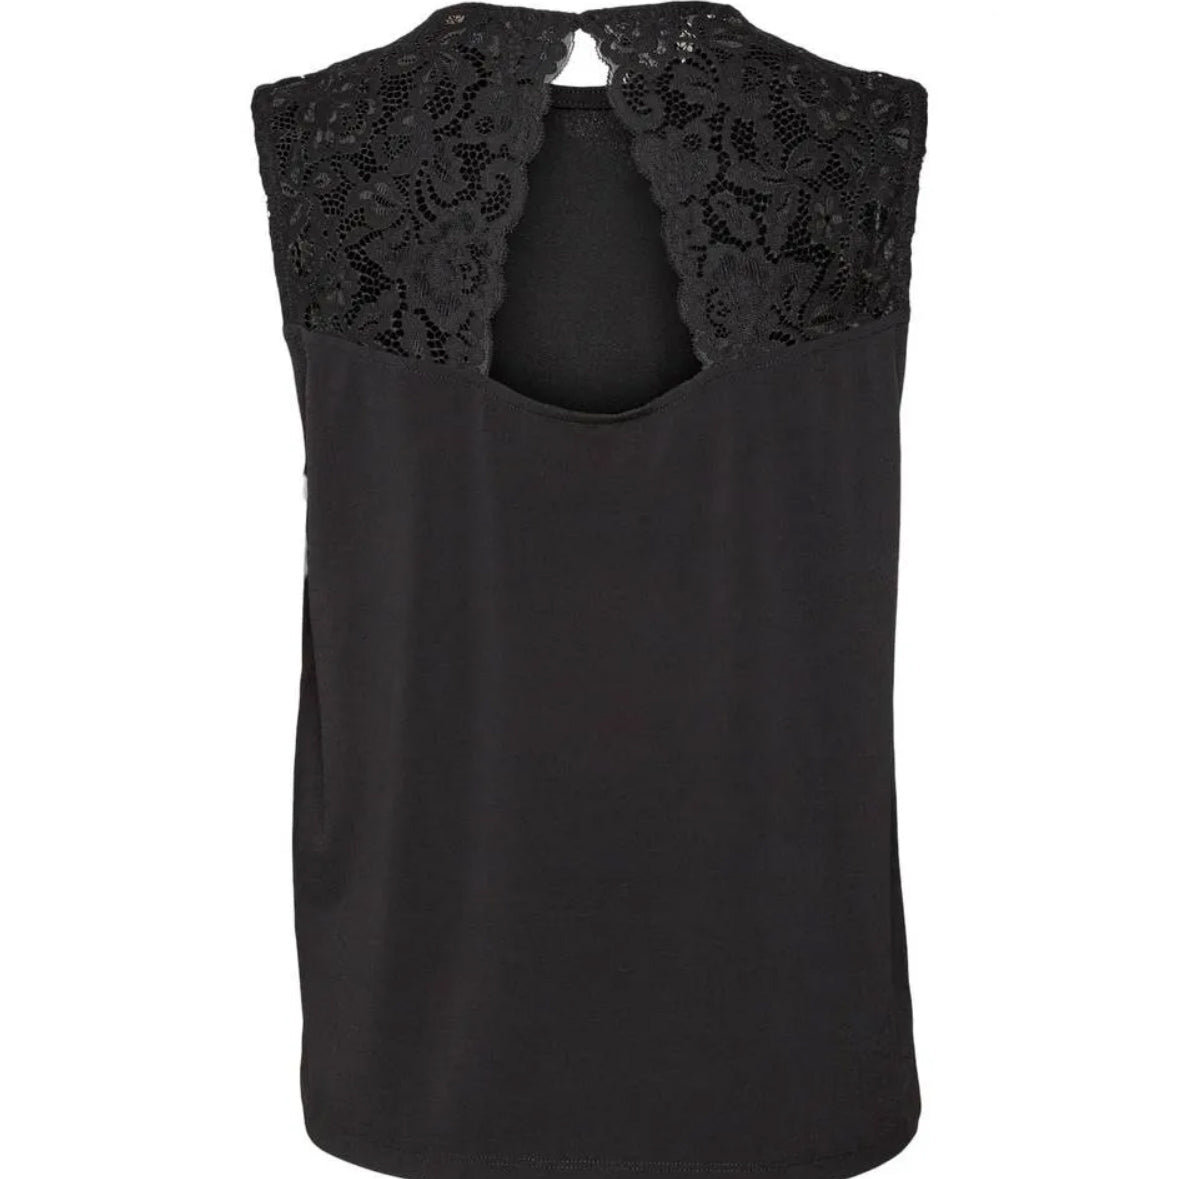 Trendy black tank with lace detailing on the back 